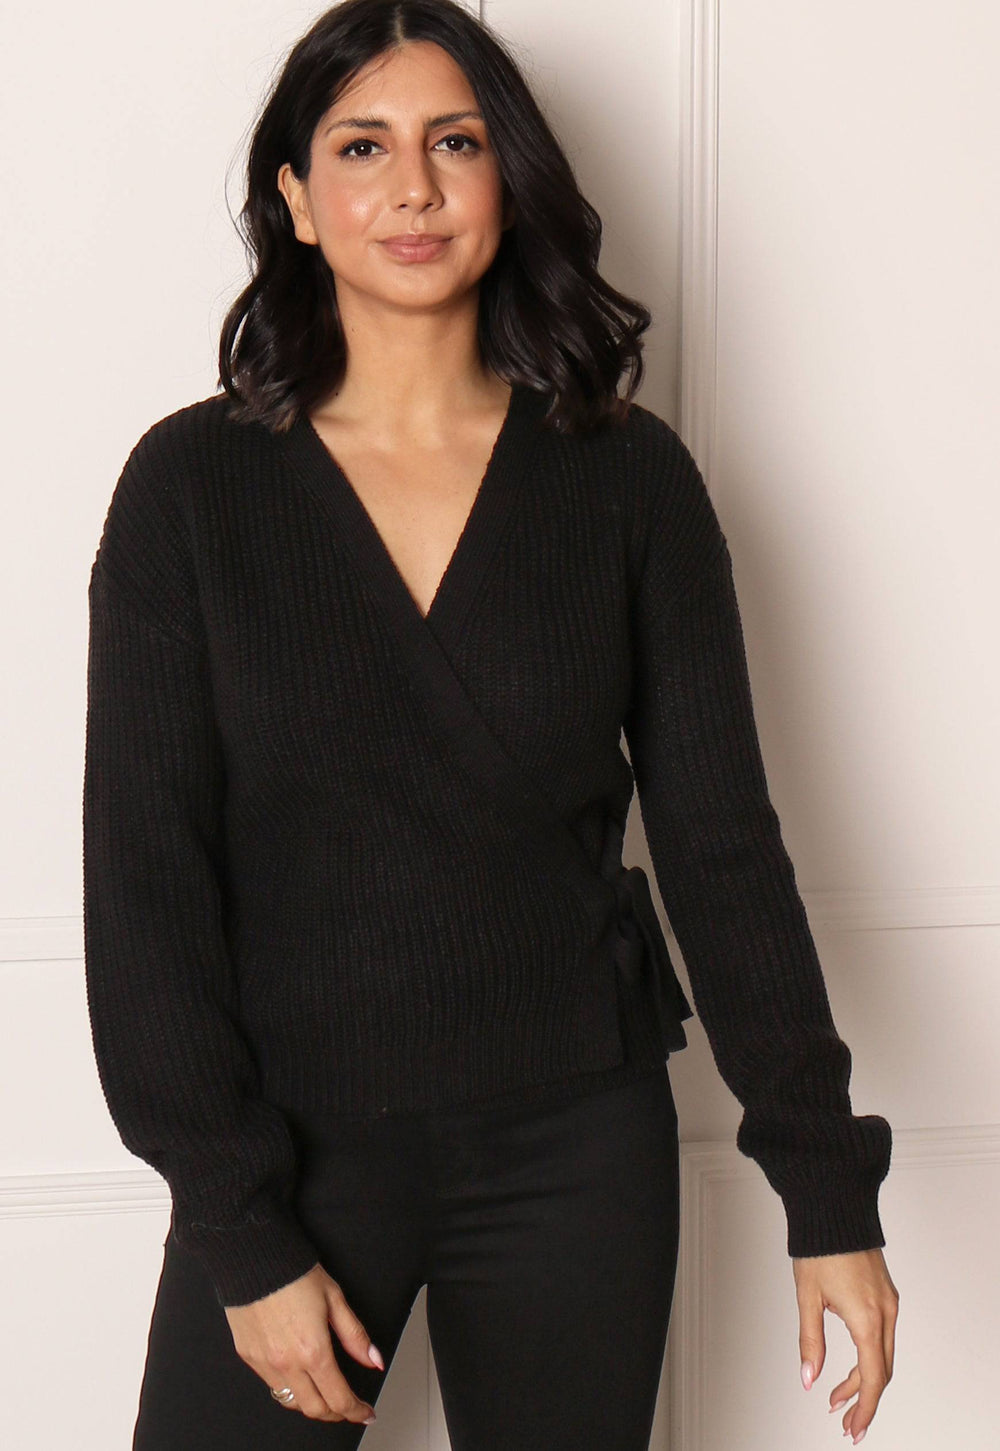 VERO MODA Lea Chunky Knit Wrap Over Cardigan in Black - One Nation Clothing